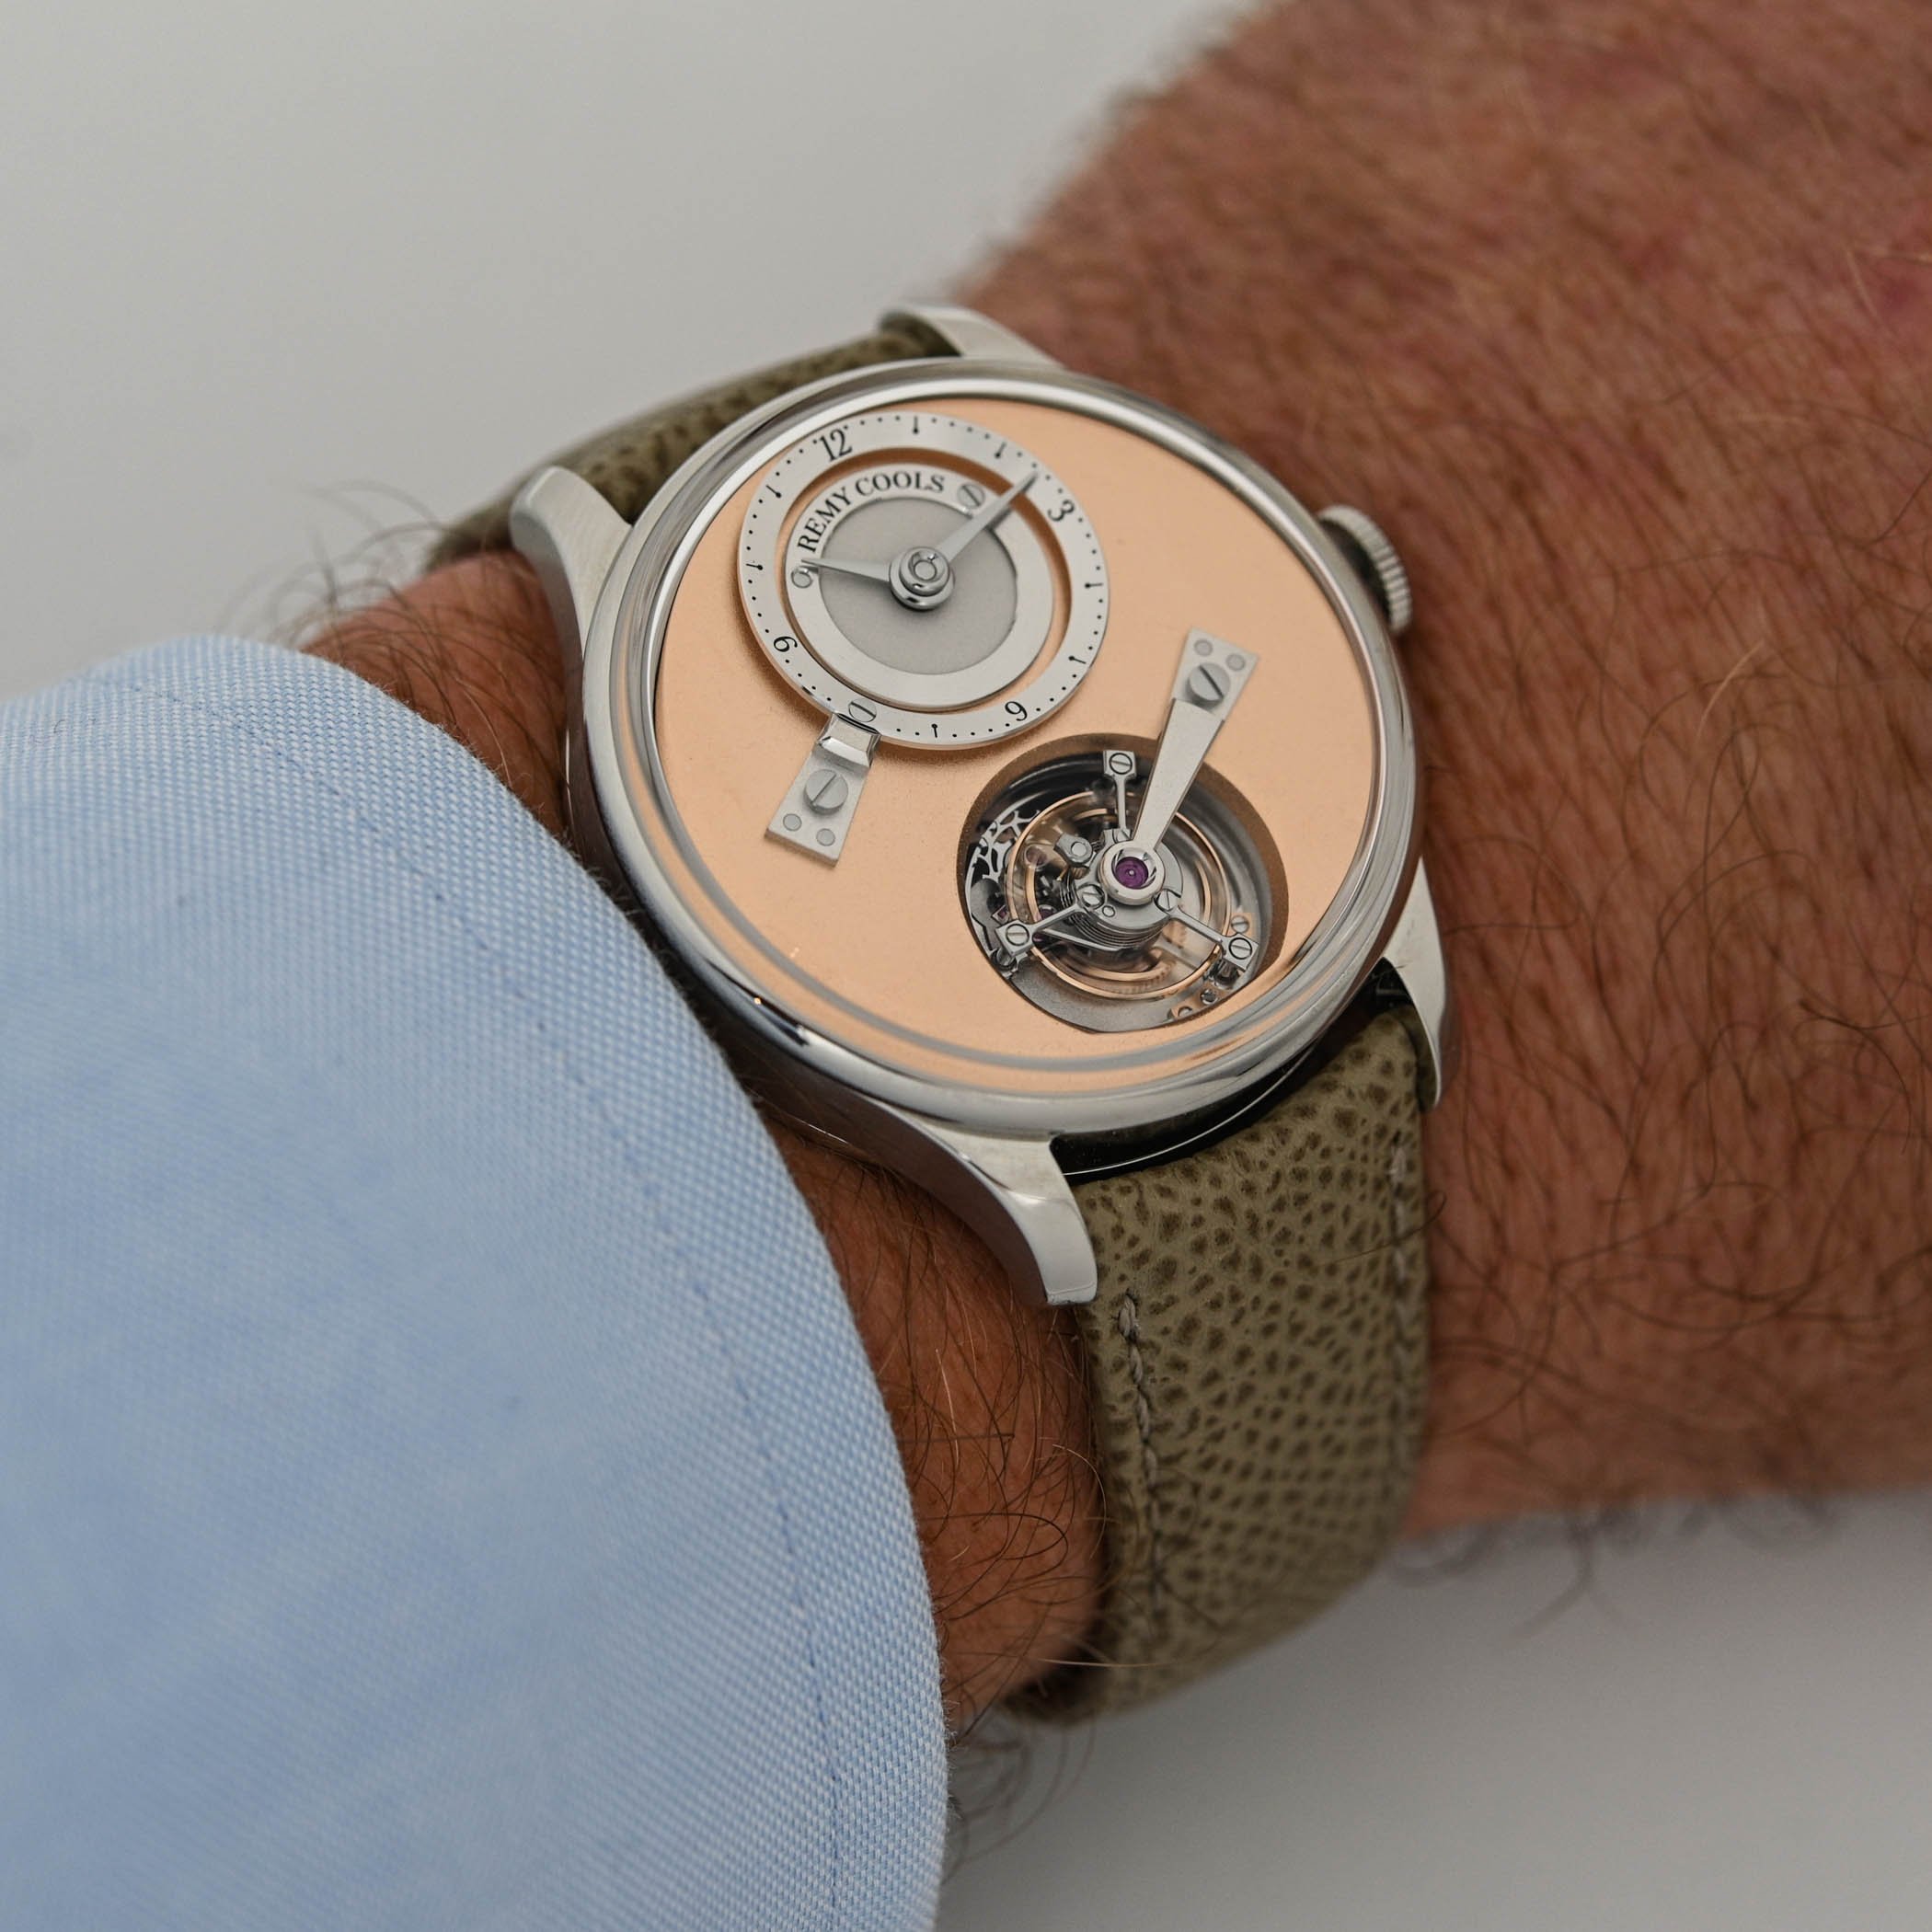 Remy Cools Tourbillon Atelier - hands-on review independent watchmaking - 6